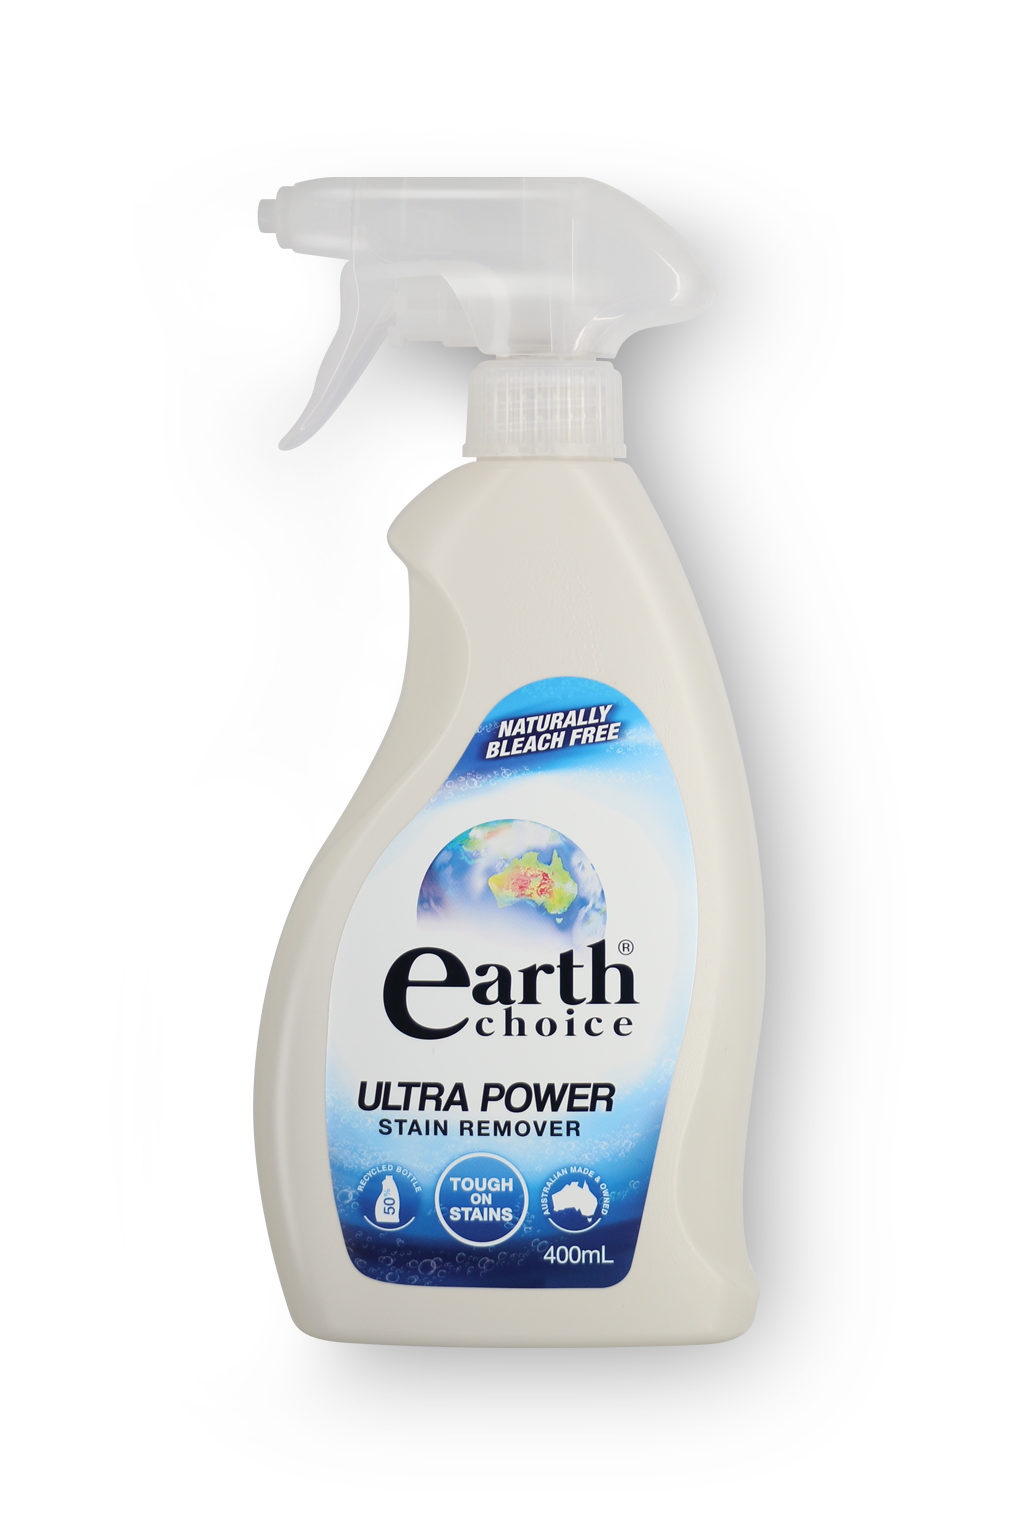 Earth Choice Pre Wash Stain Remover Trigger 400ml